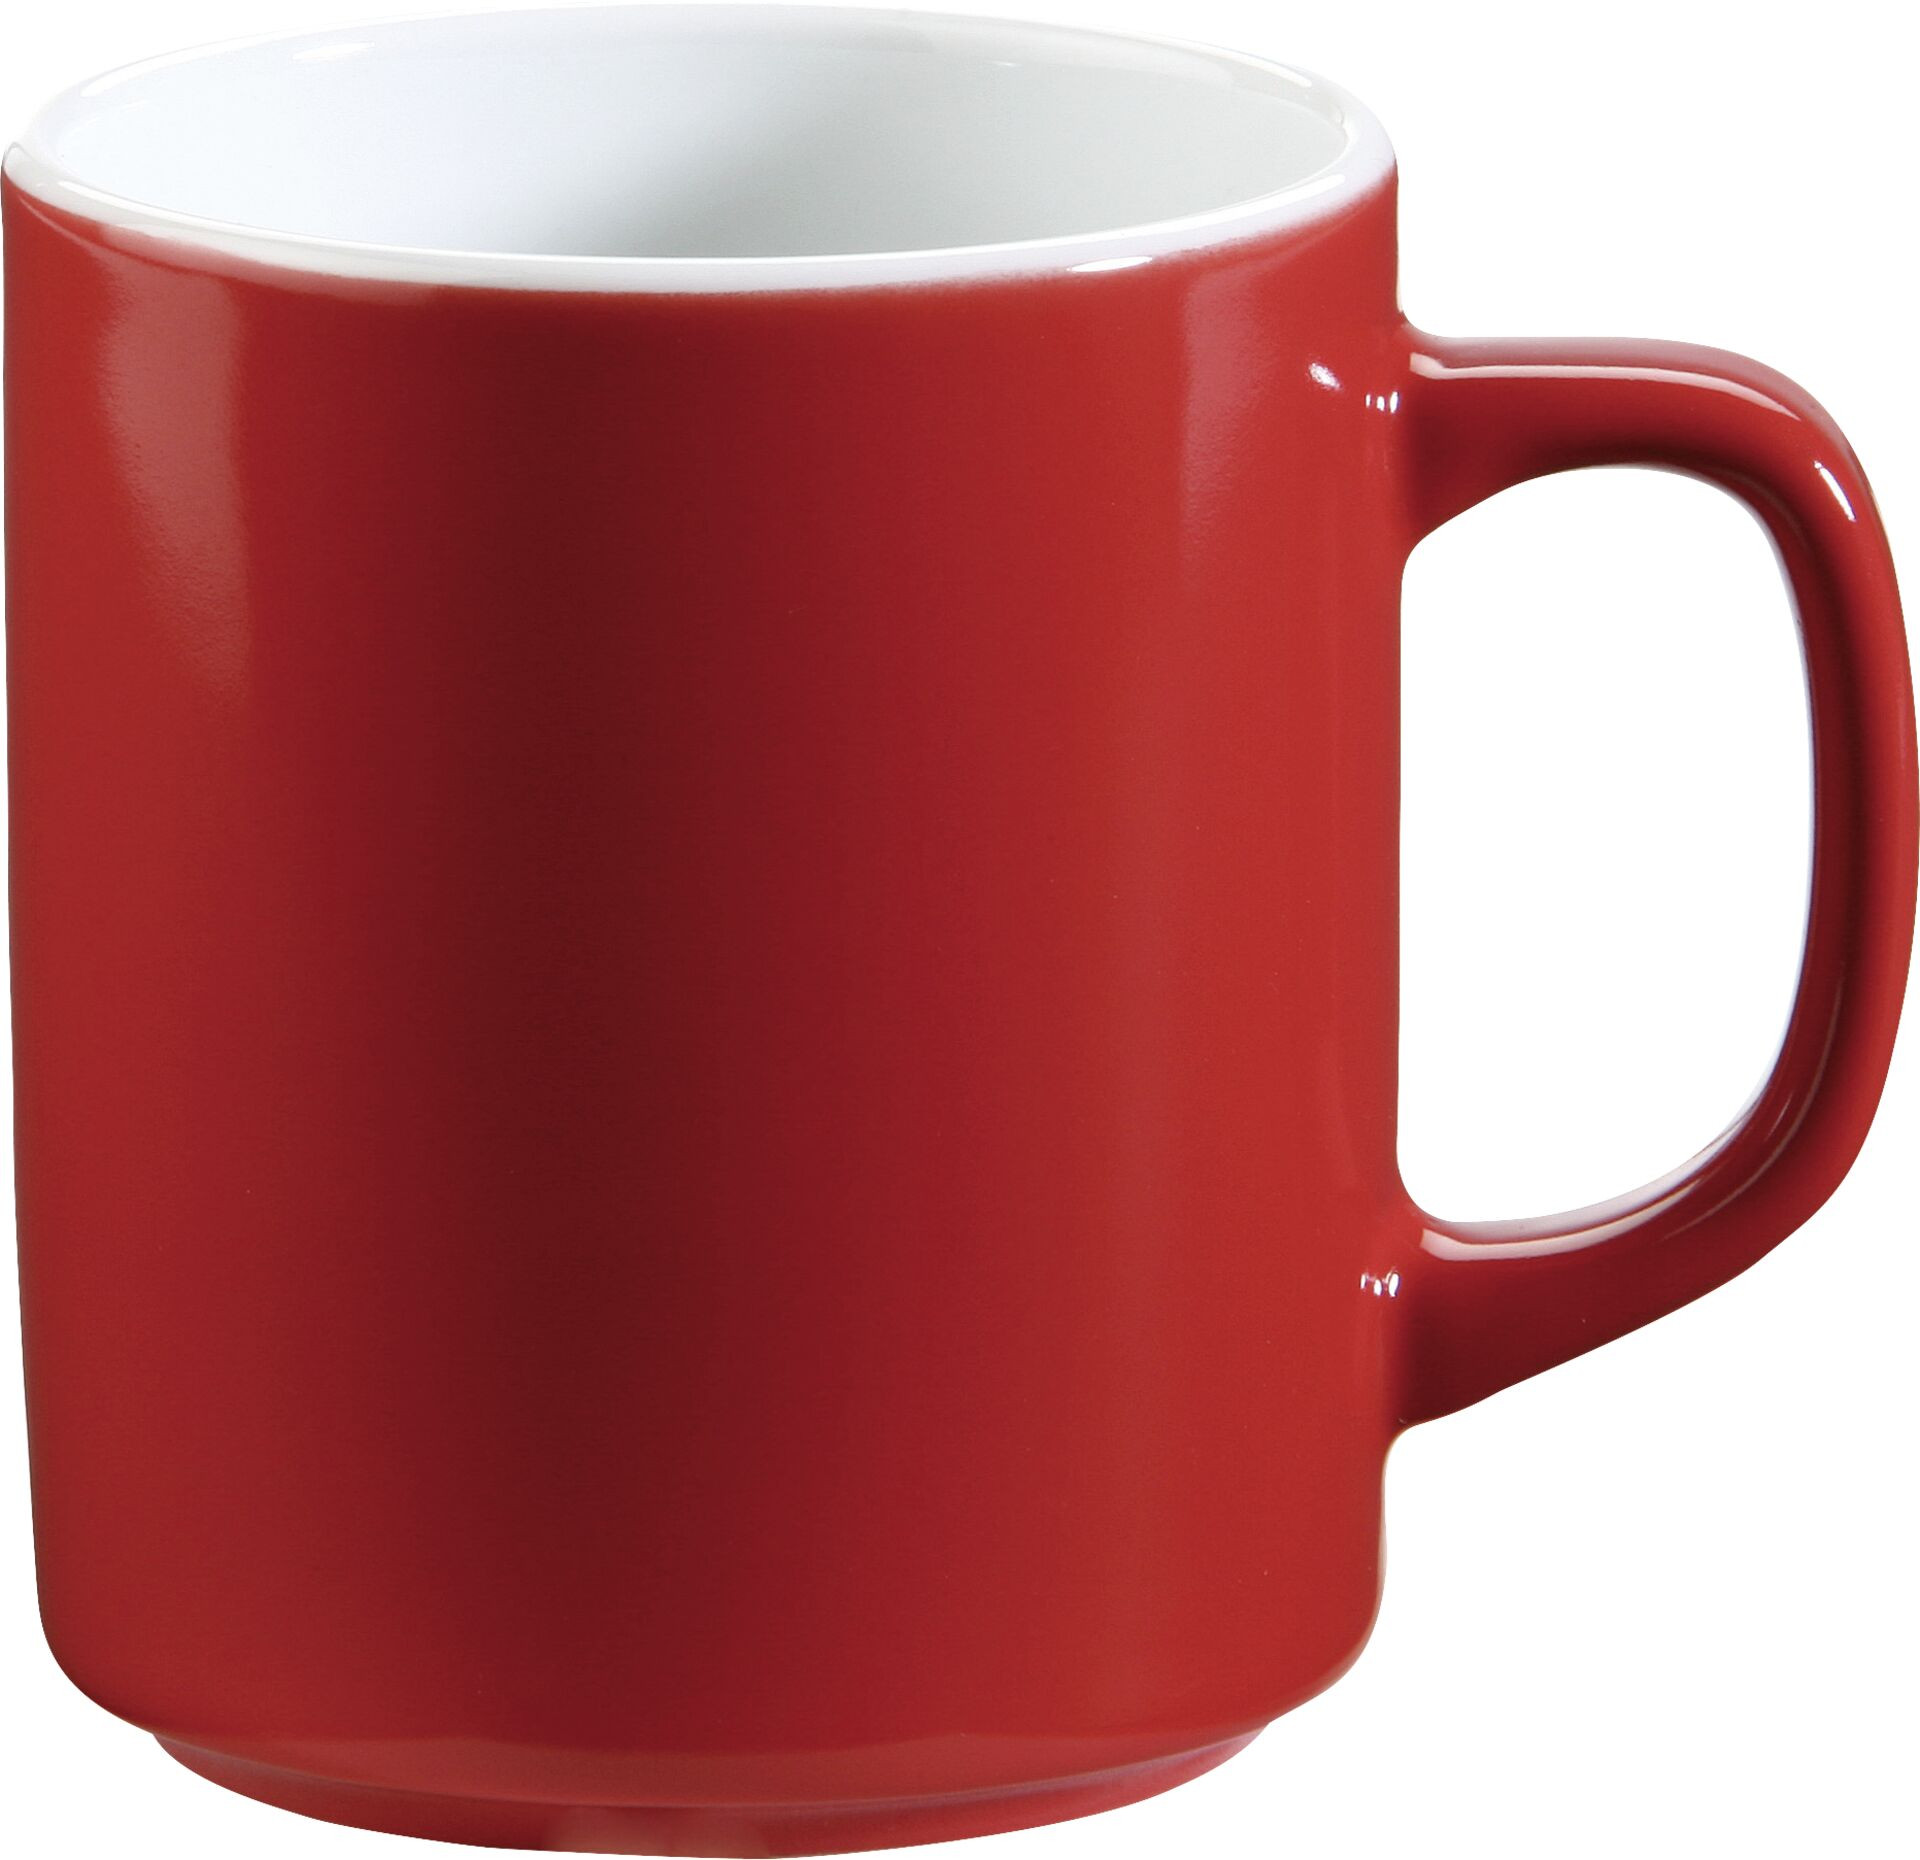 Kaffeebecher "System color" 0,3 l rot